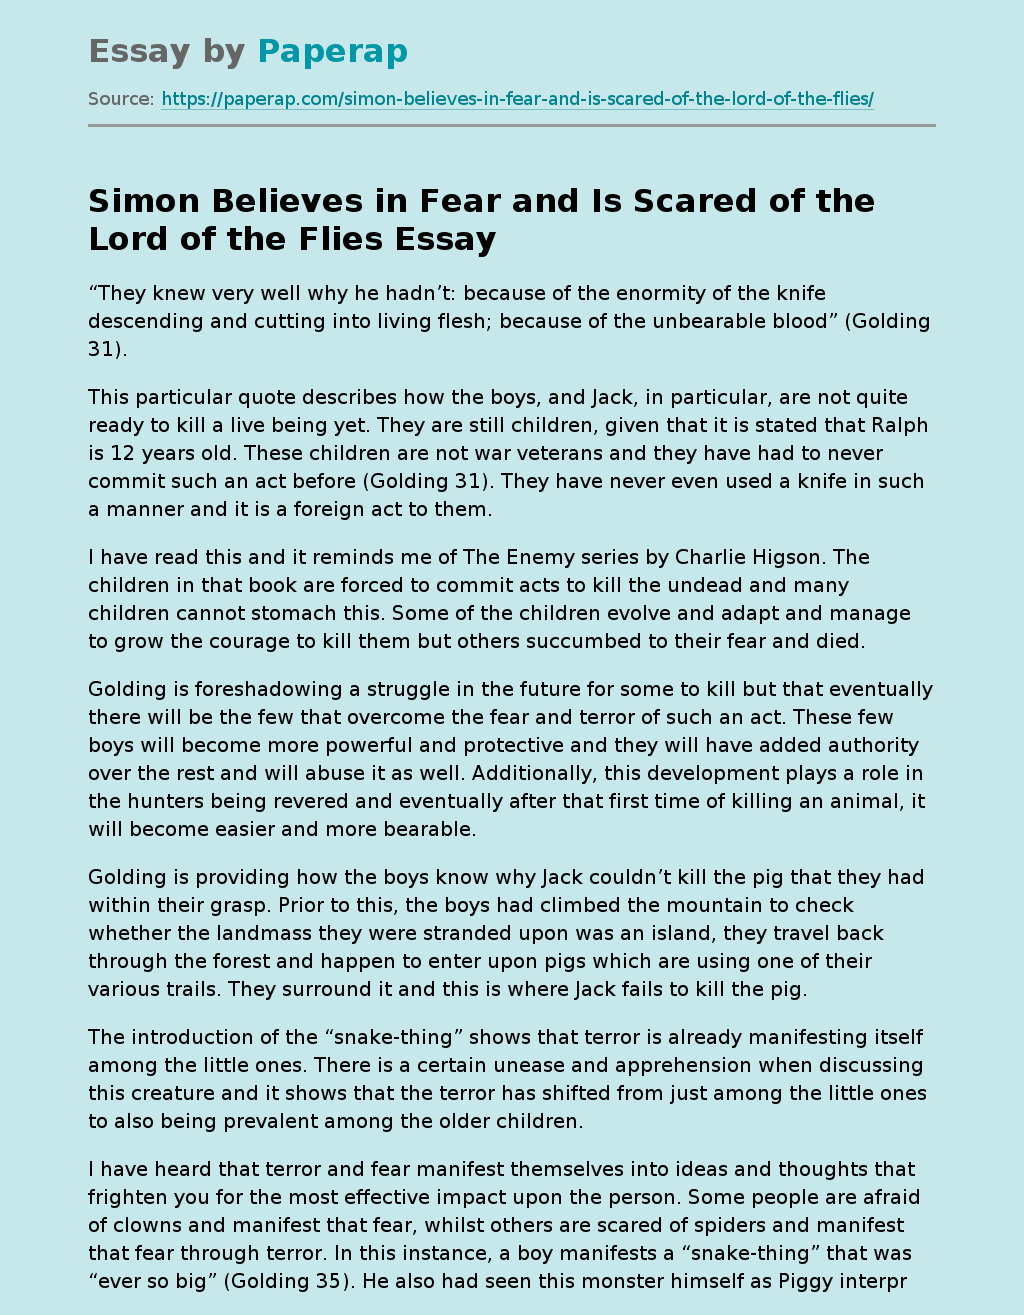 Simon Believes in Fear and Is Scared of the Lord of the Flies